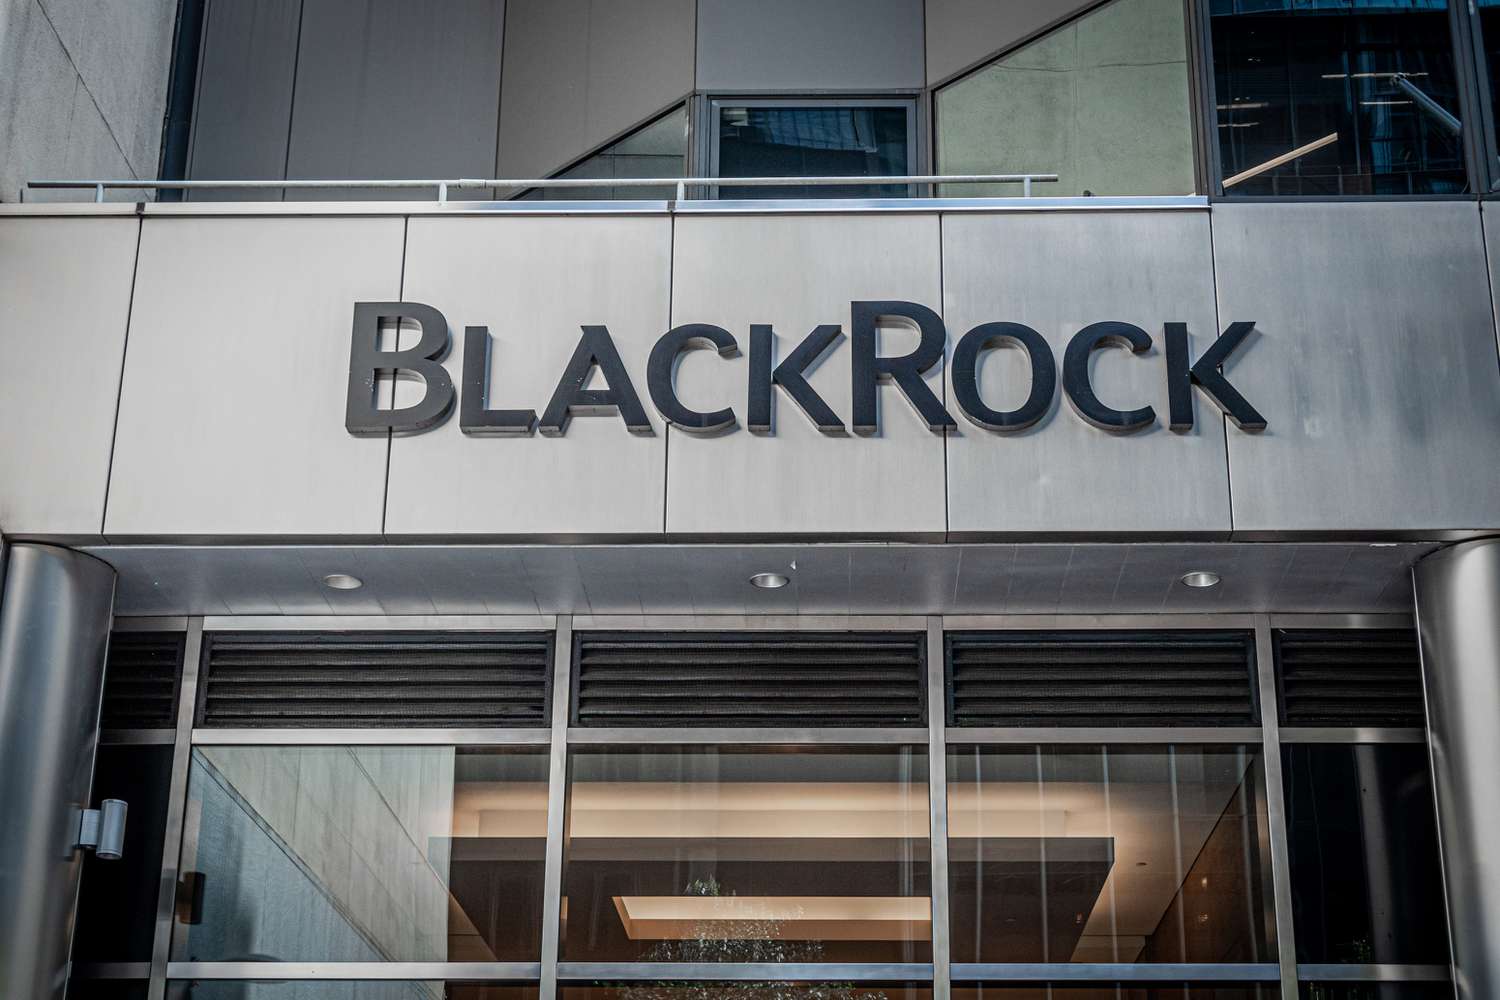 BlackRock Makes Infrastructure Push With $12.5 Billion Purchase of GIP